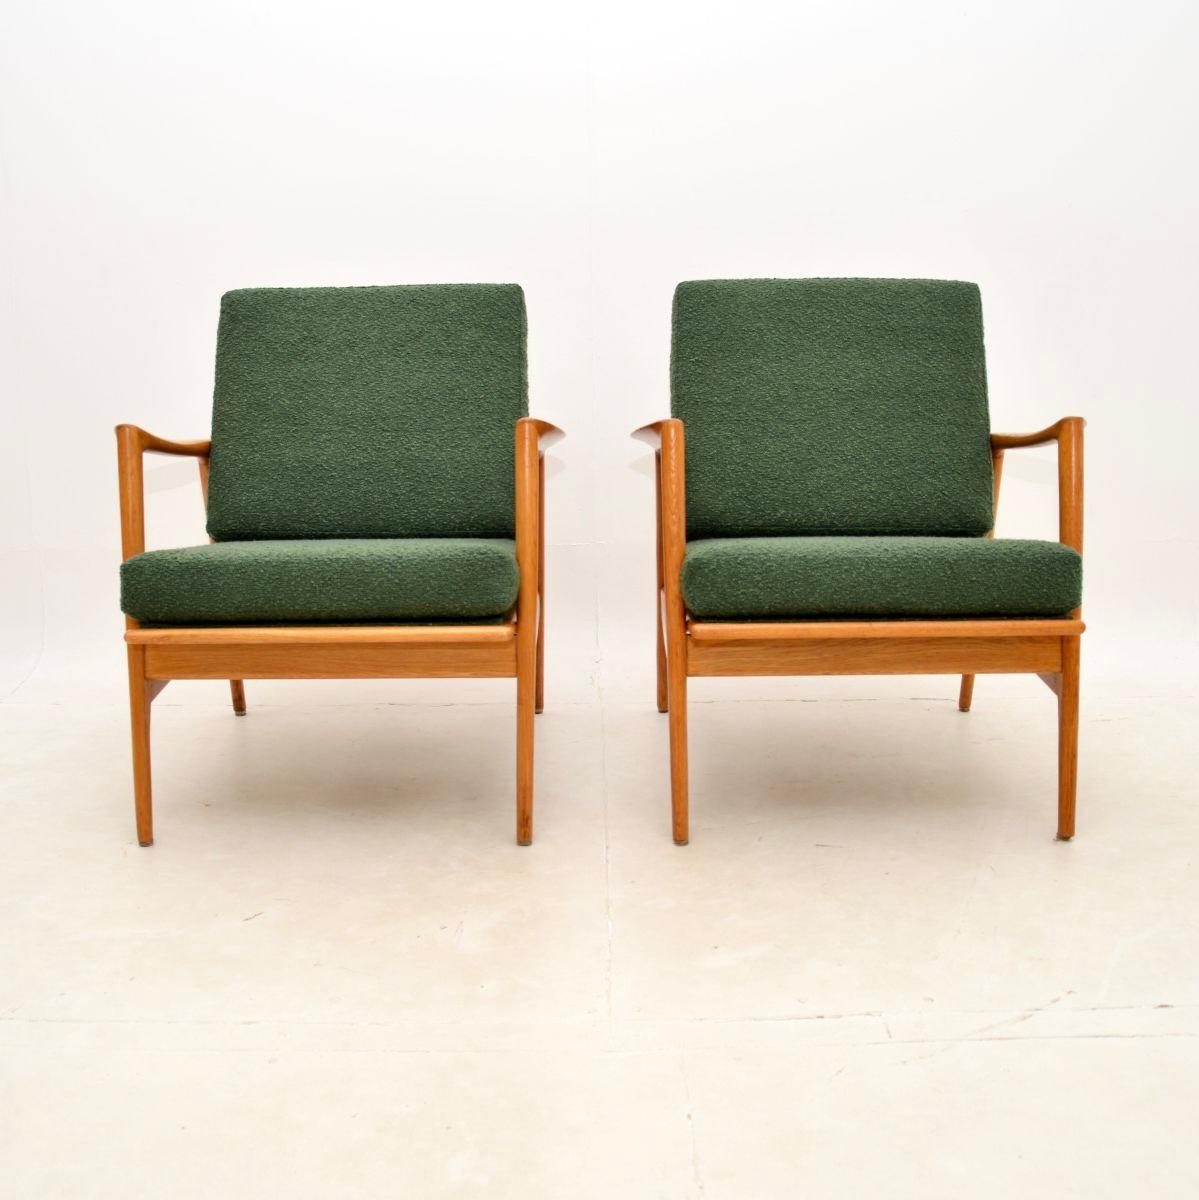 A very stylish and comfortable pair of vintage Swedish oak armchairs. We recently imported these from Sweden, they date from the 1960’s.

The quality is fantastic, they have beautifully sculpted solid oak frames and look amazing from all angles. The